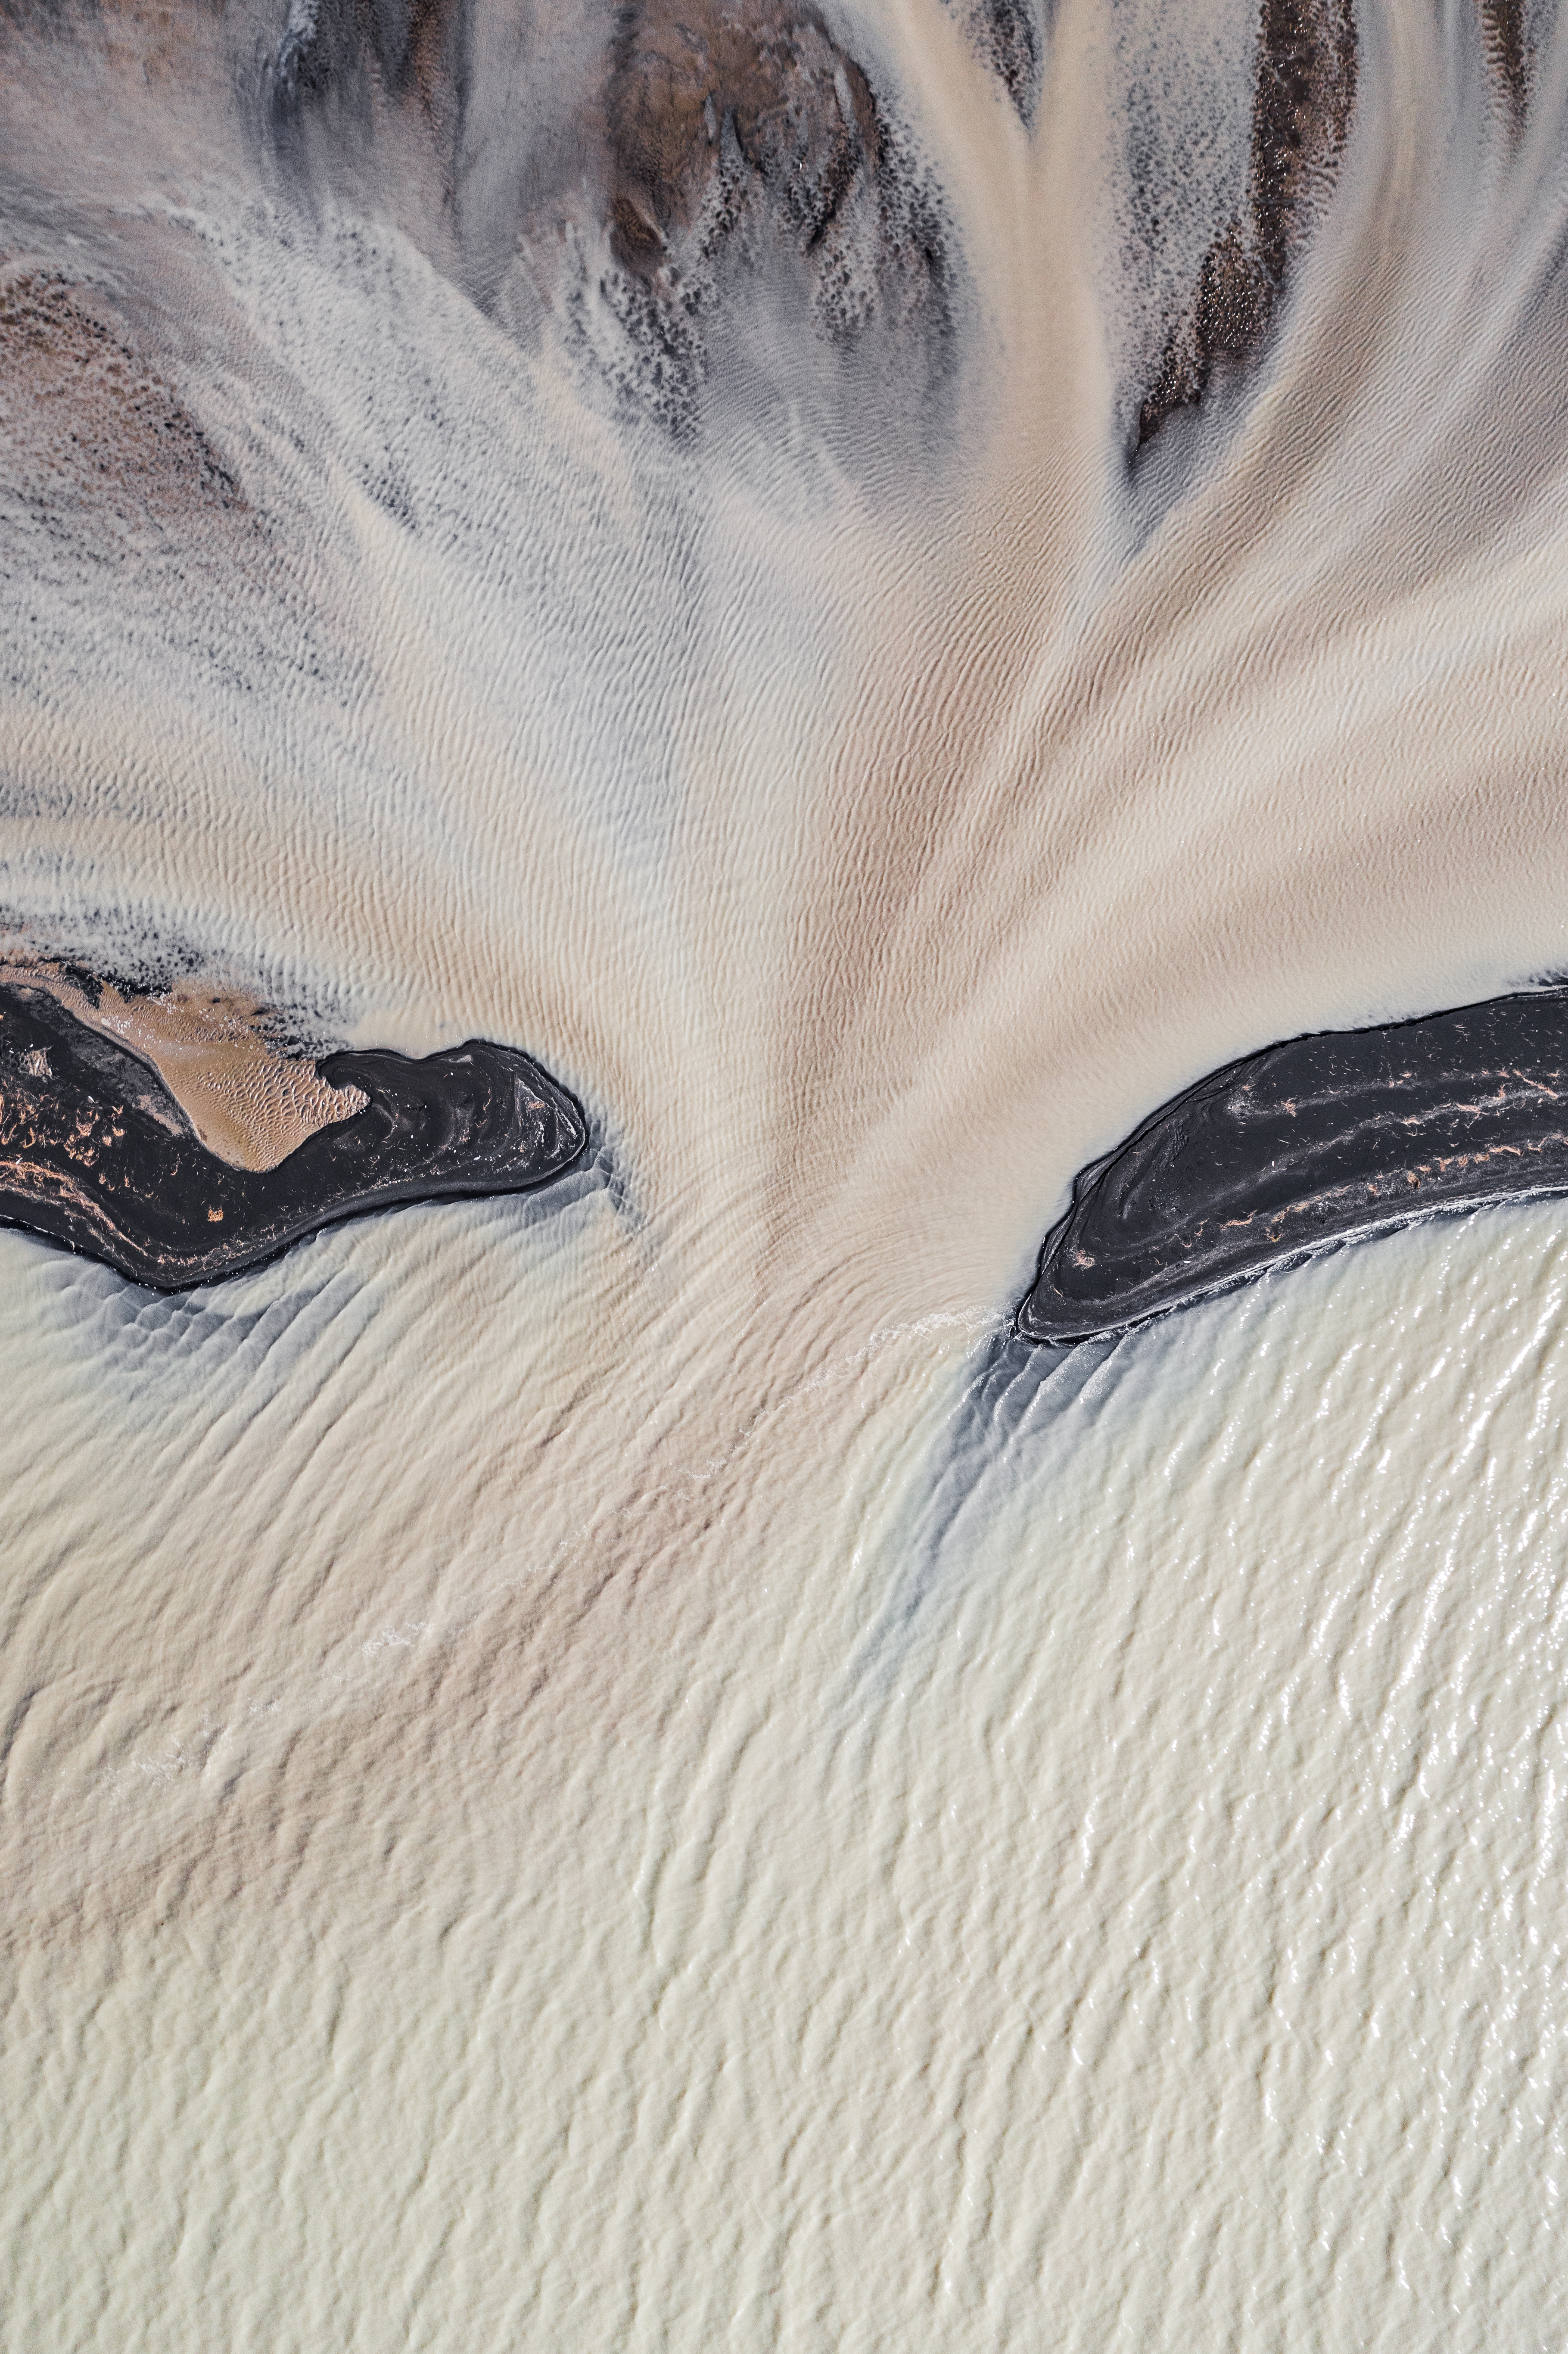 Image of glacial meltwater on black sand beaches and a braided river photographed from directly above in Iceland